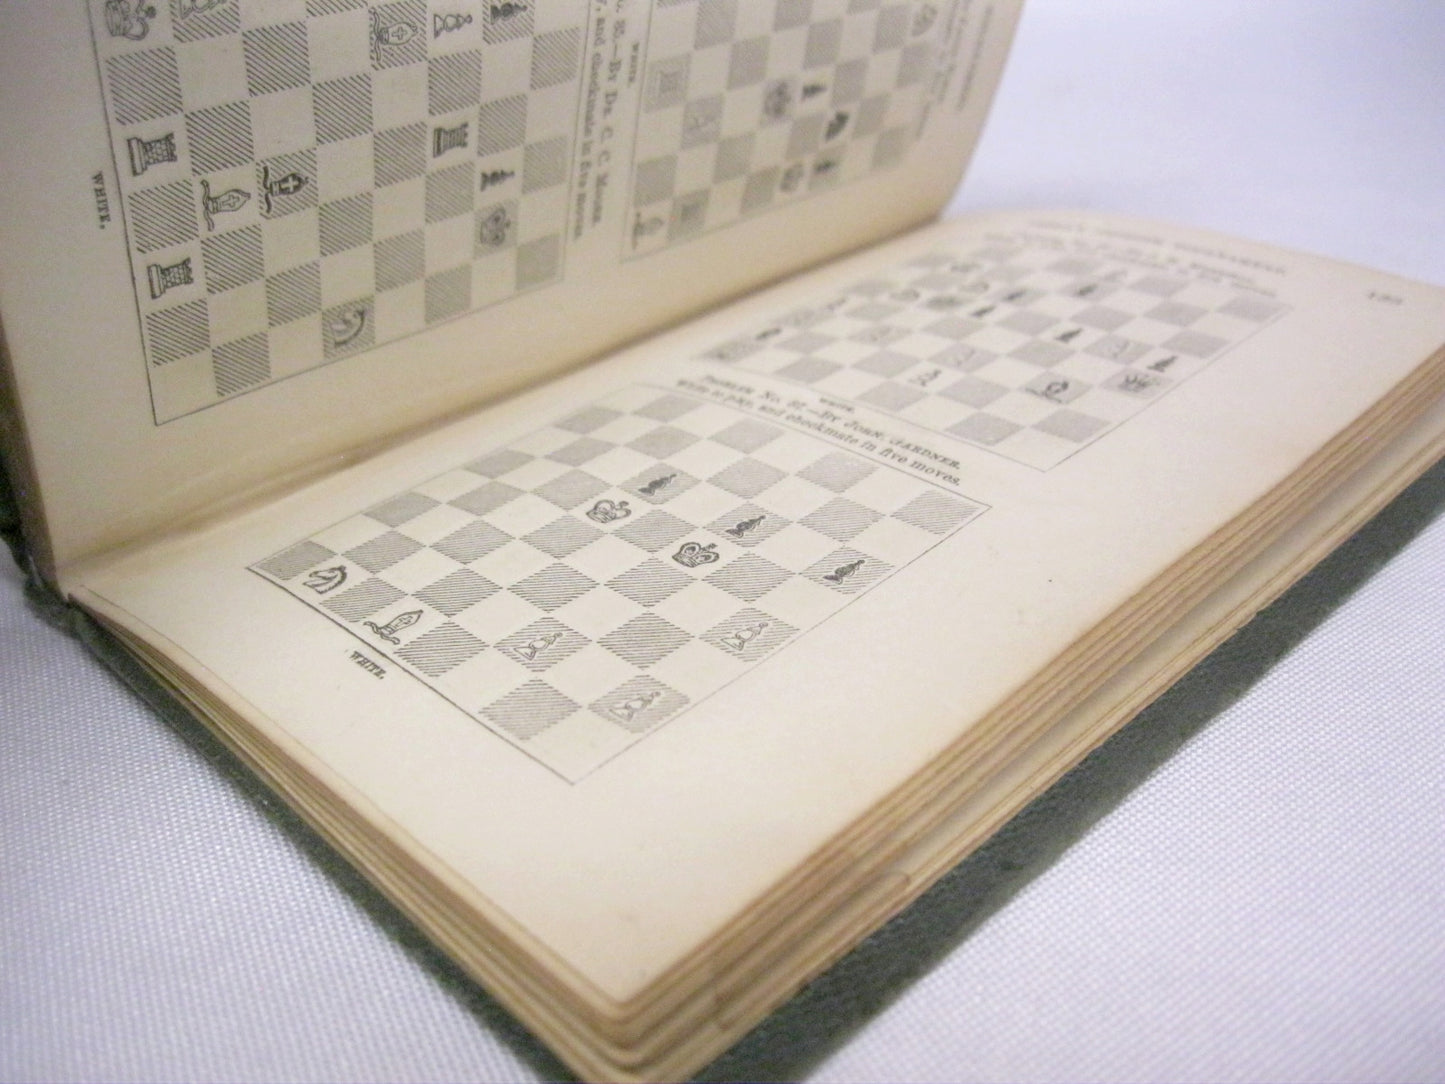 Morphy's Games of Chess, and Frère's Problem Tournament by Thomas Frère